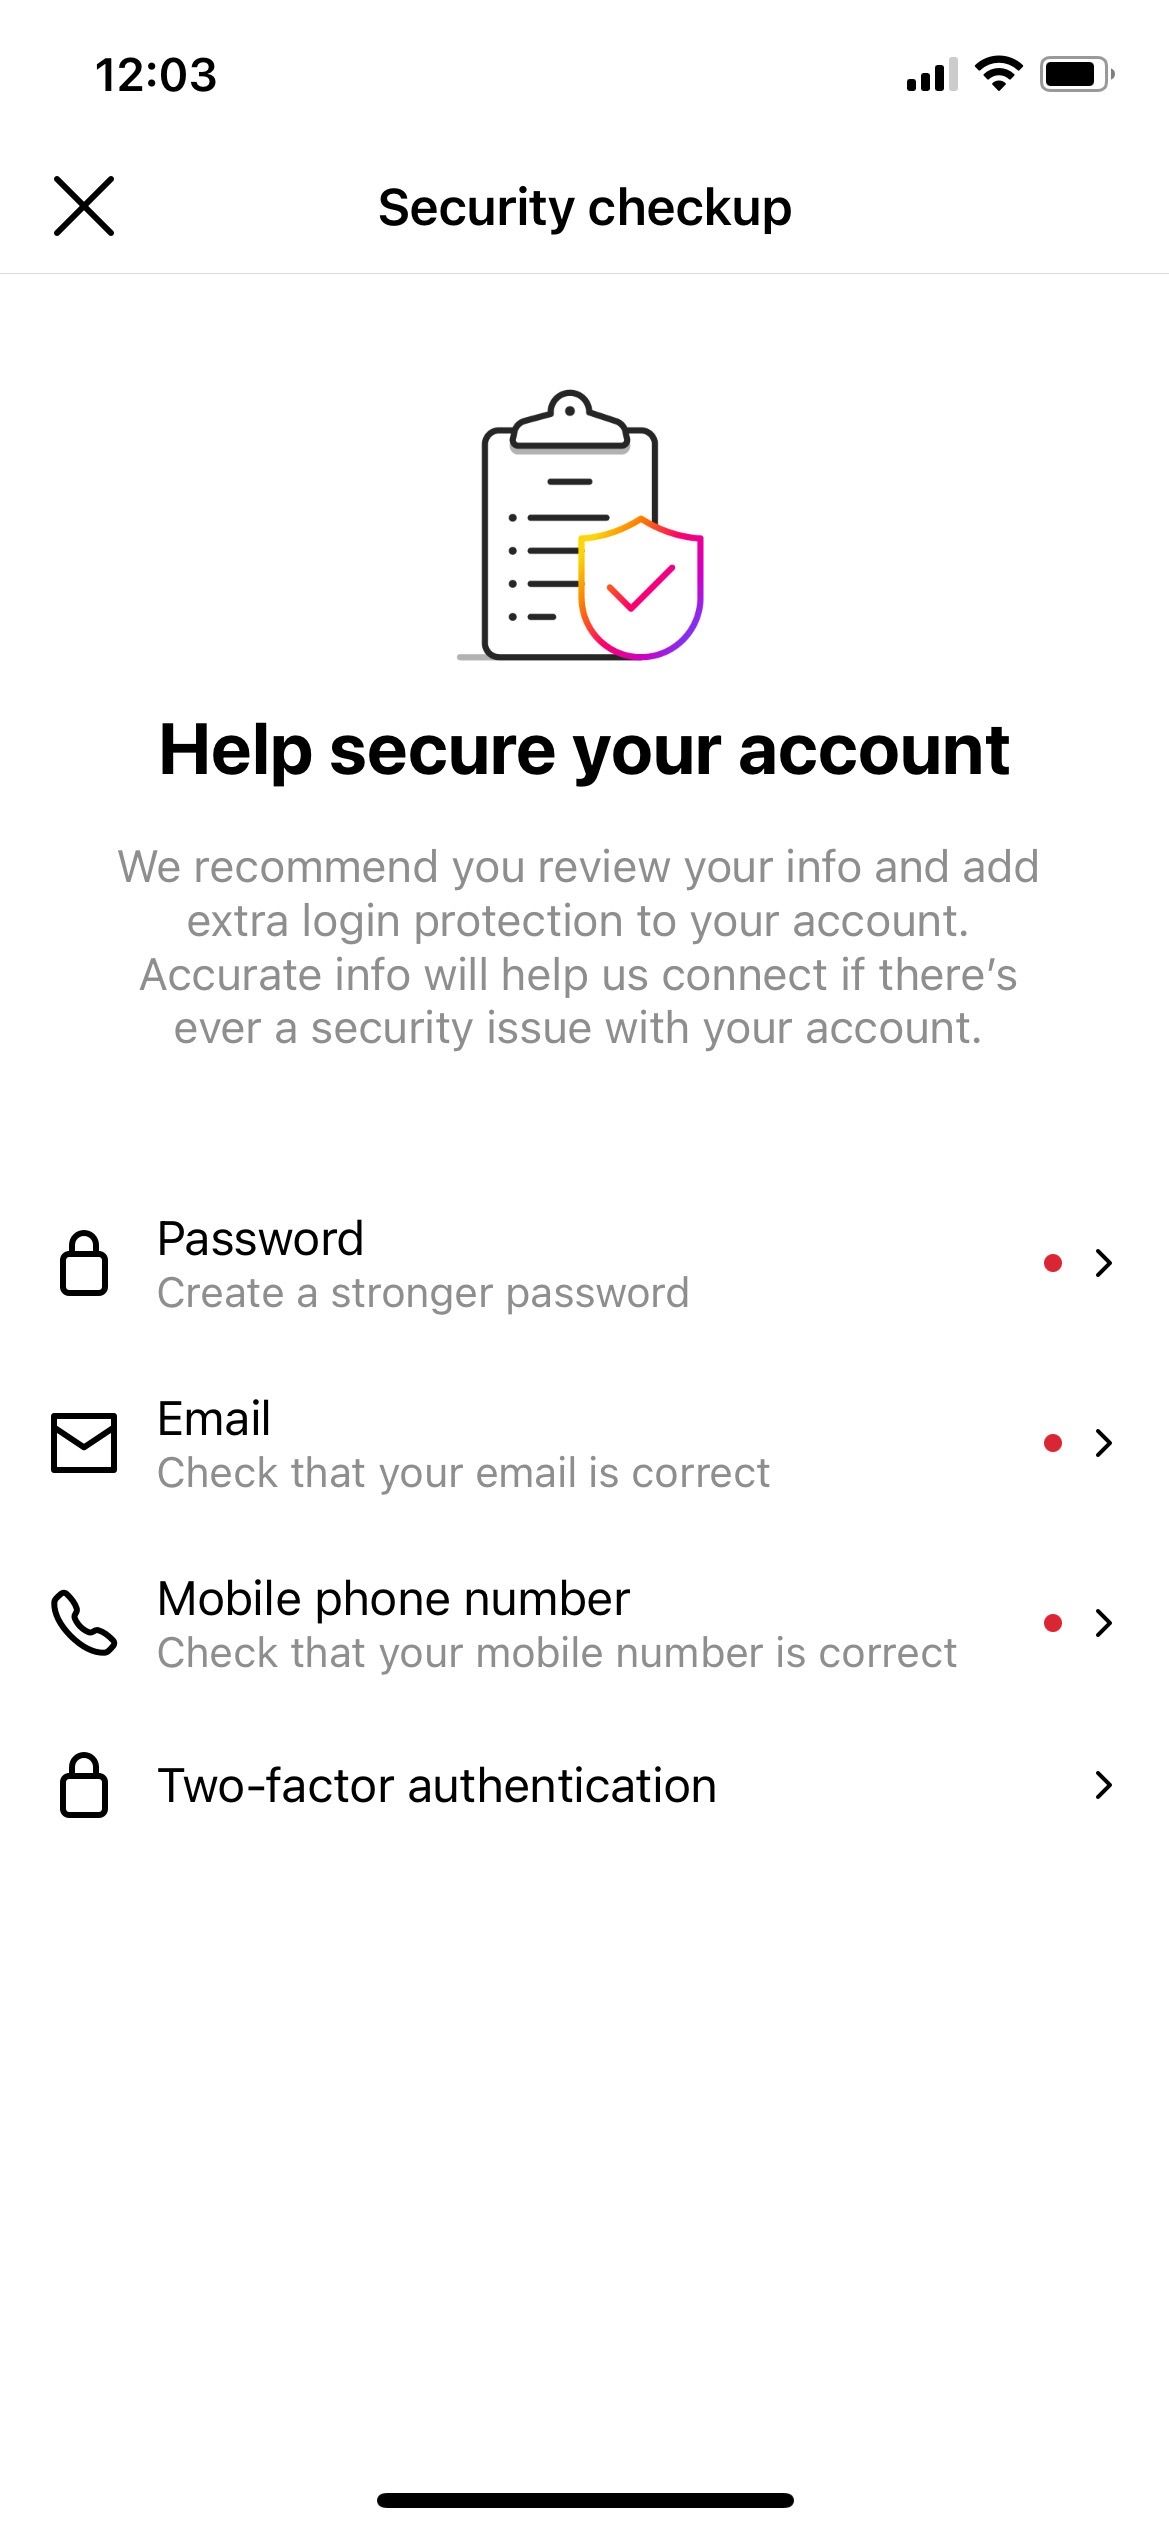 Security checkup on Instagram